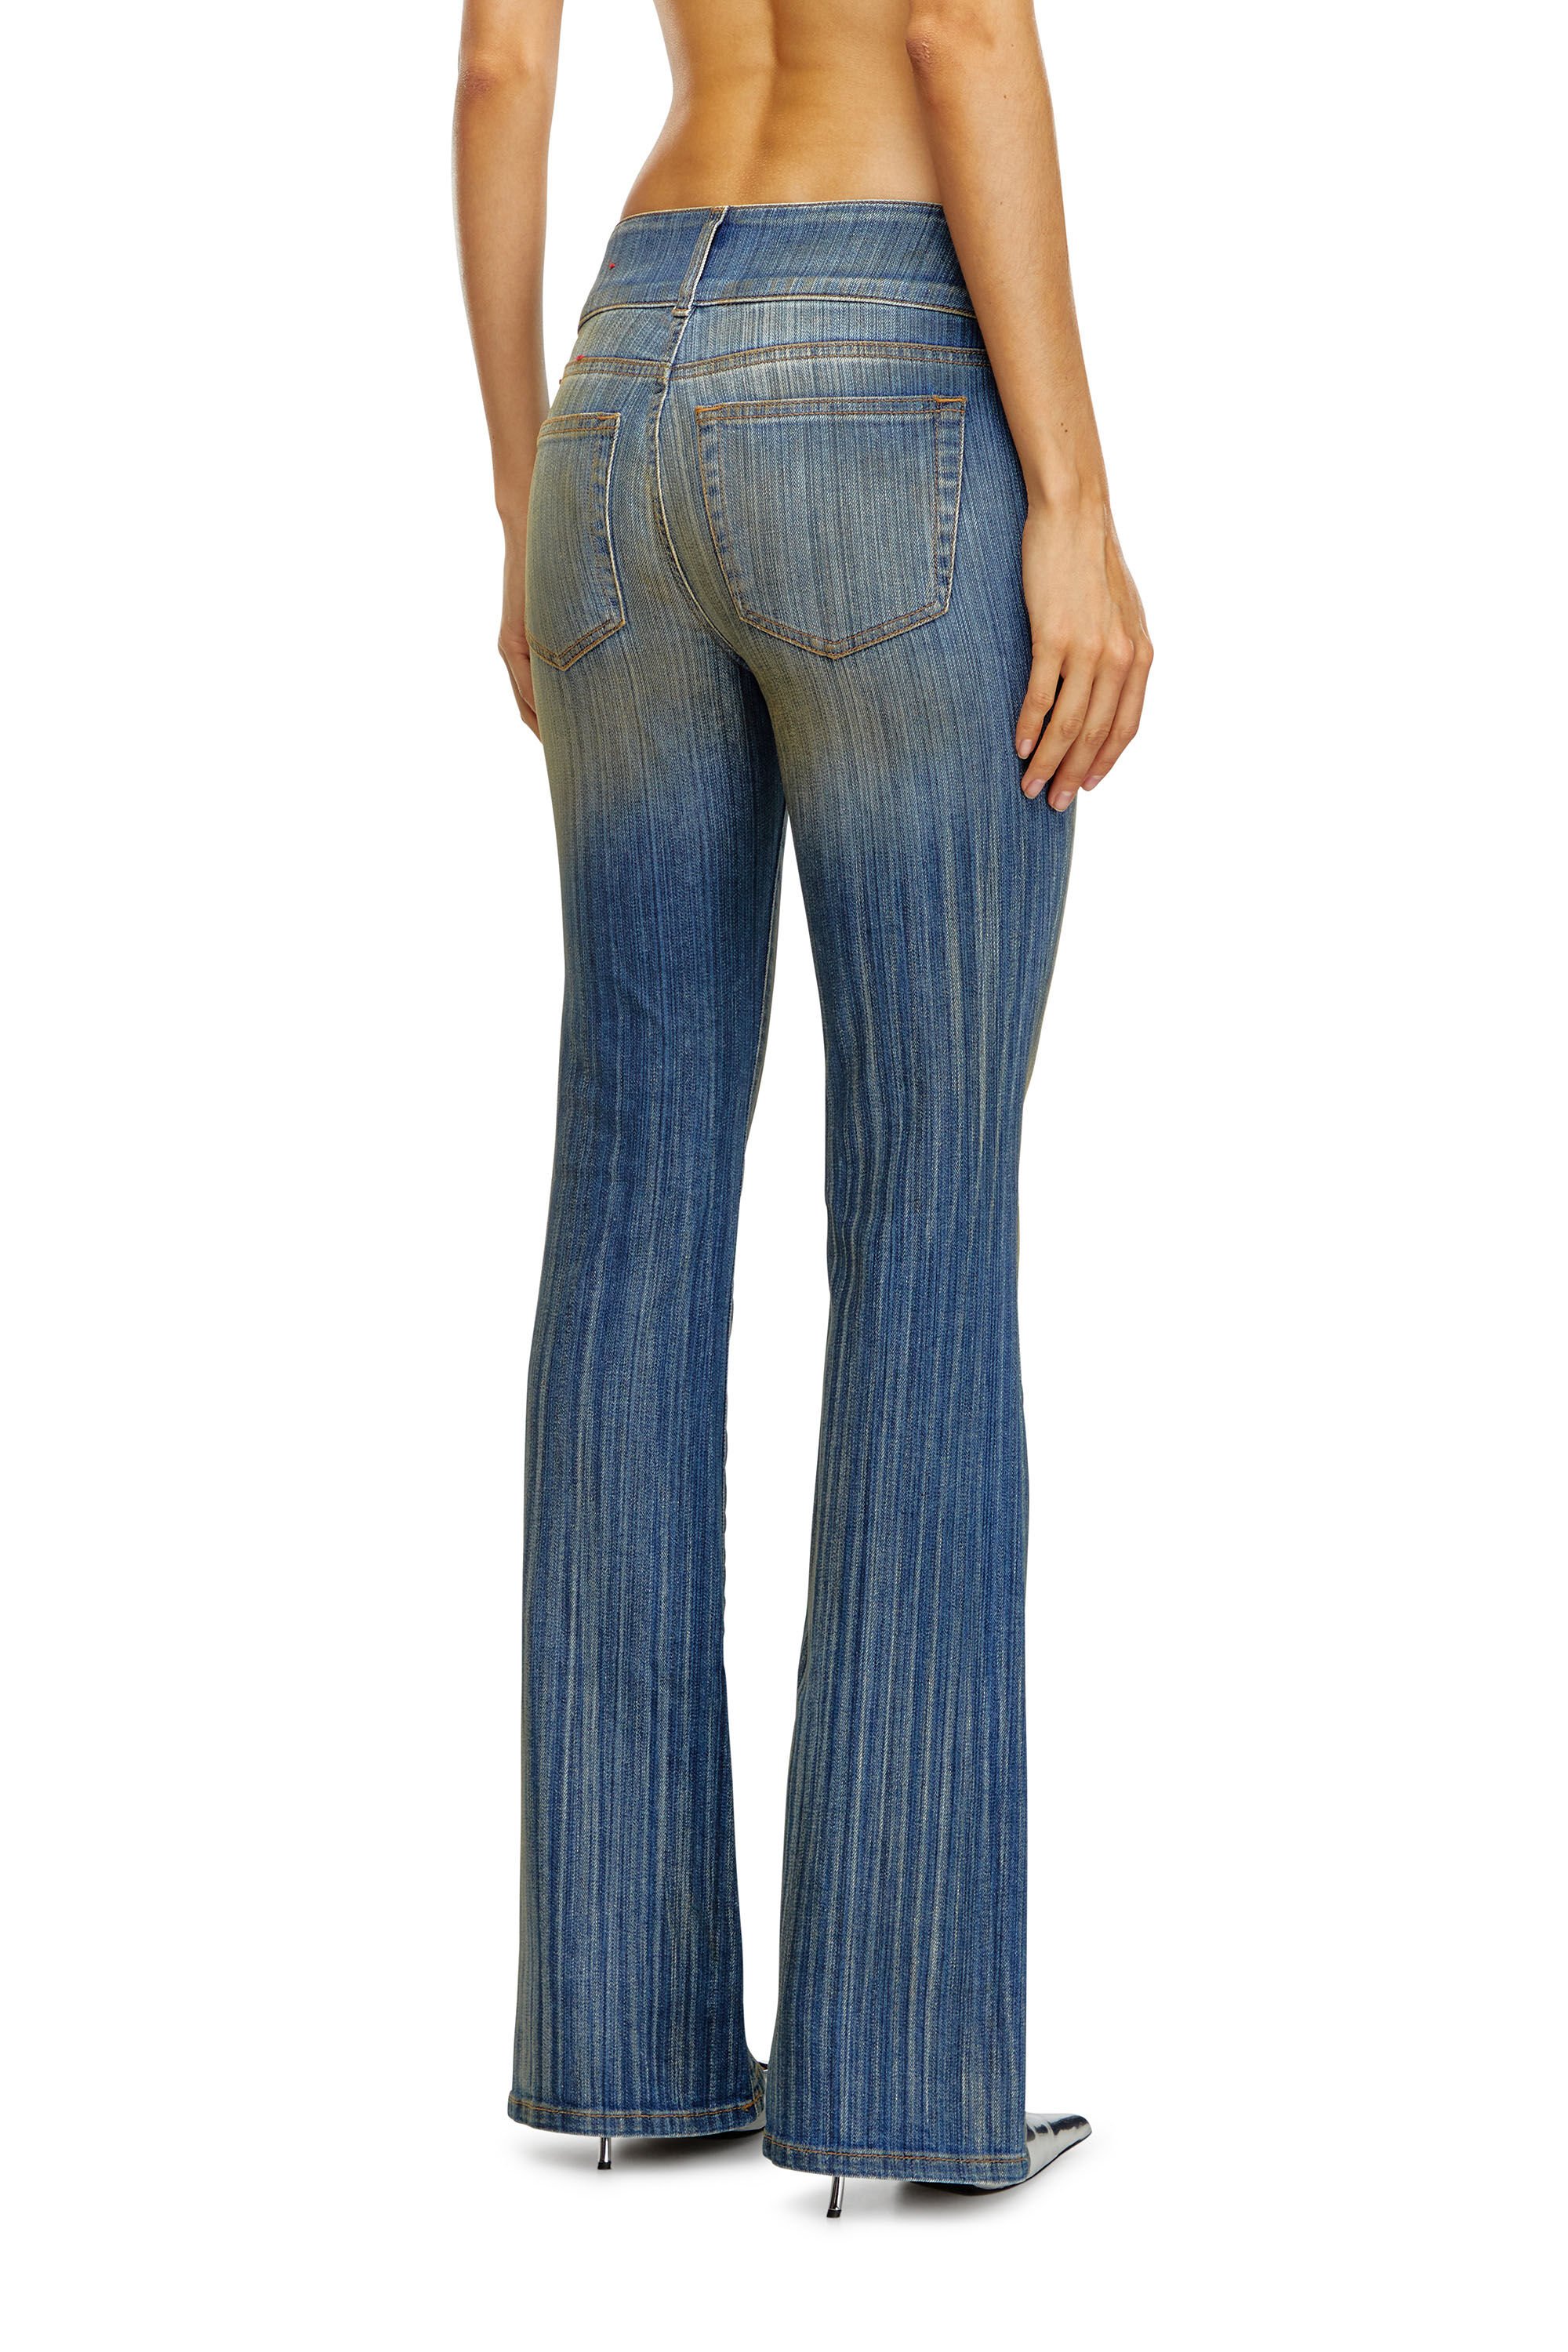 Diesel - Bootcut and Flare Jeans D-Propol 0CBCX, Mujer Bootcut y Flare Jeans - D-Propol in Azul marino - Image 5